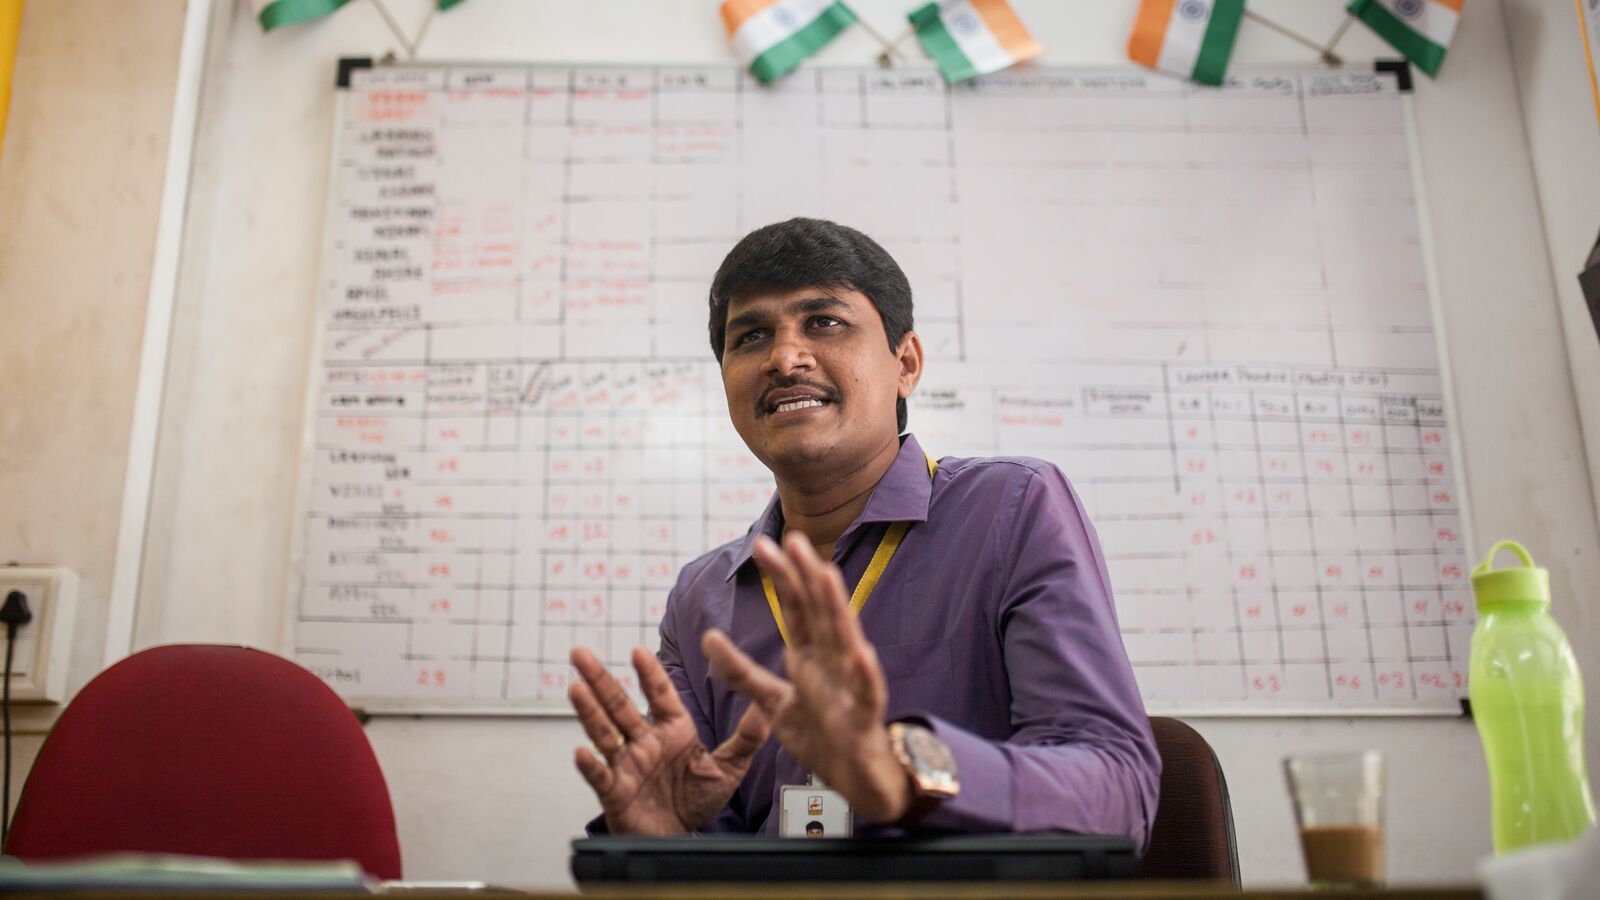 A Svasti manager in a purple shirt sits at a desk in India holding up two hands.